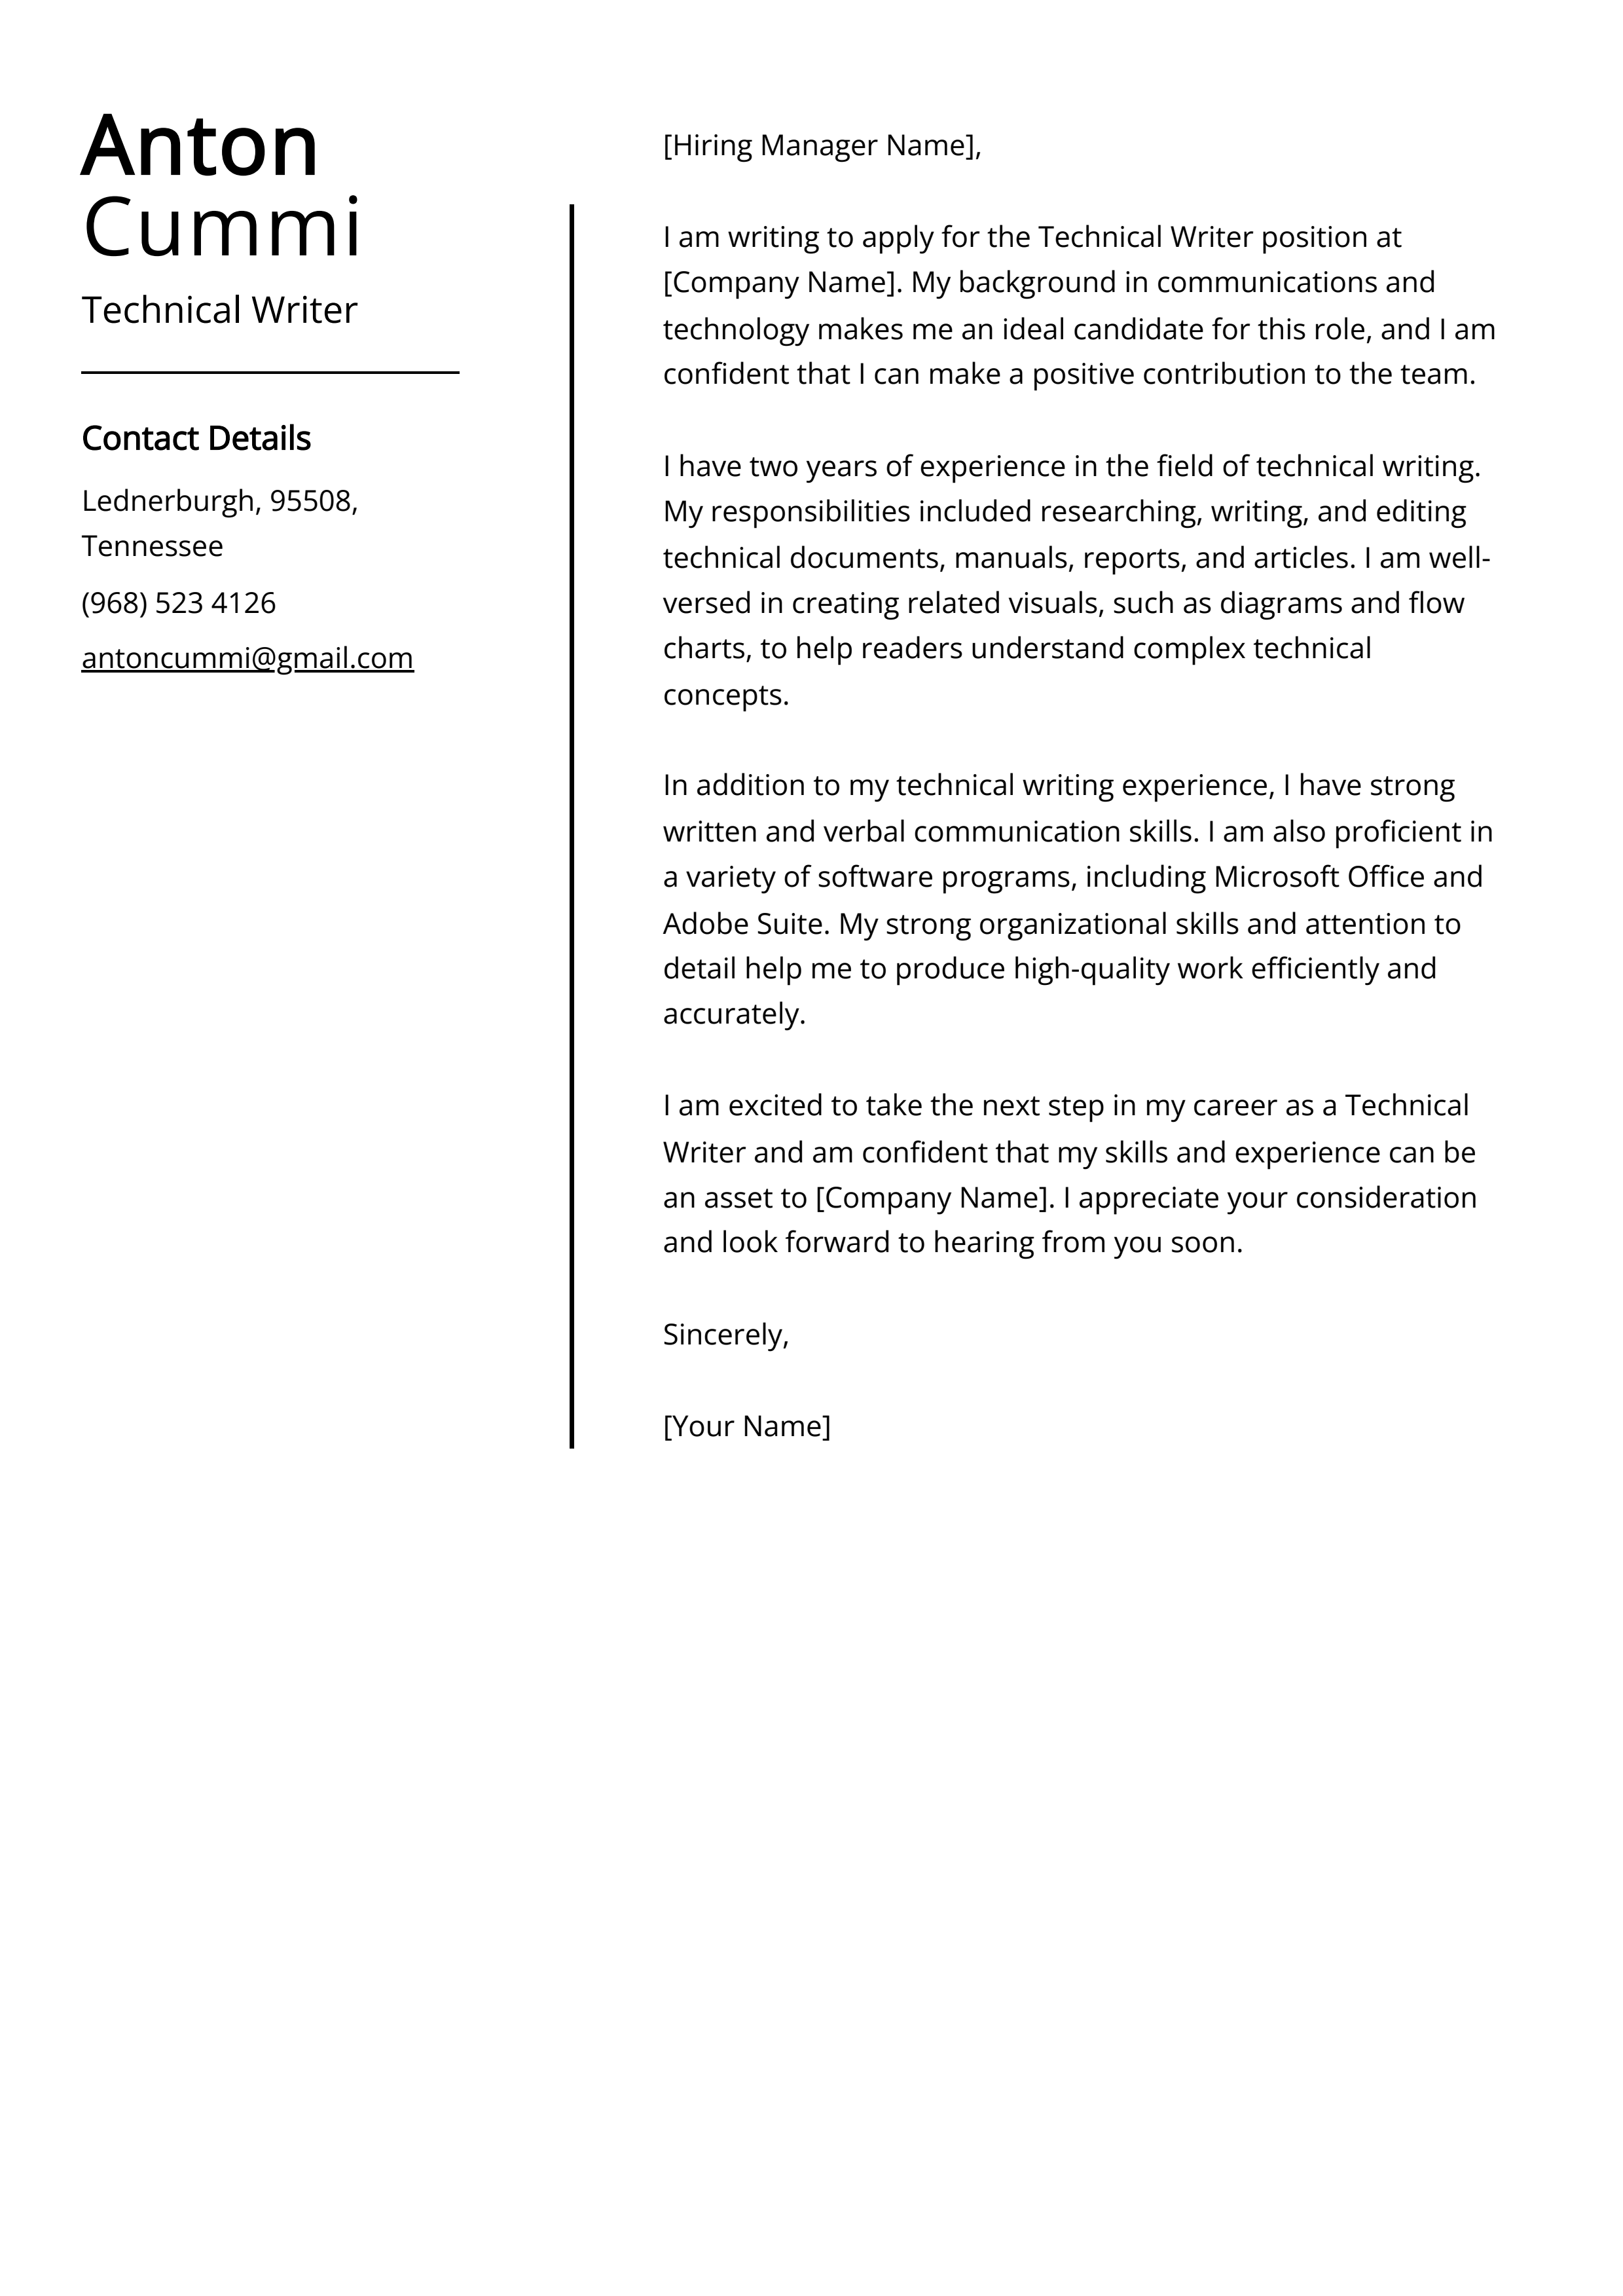 Technical Writer Cover Letter Example